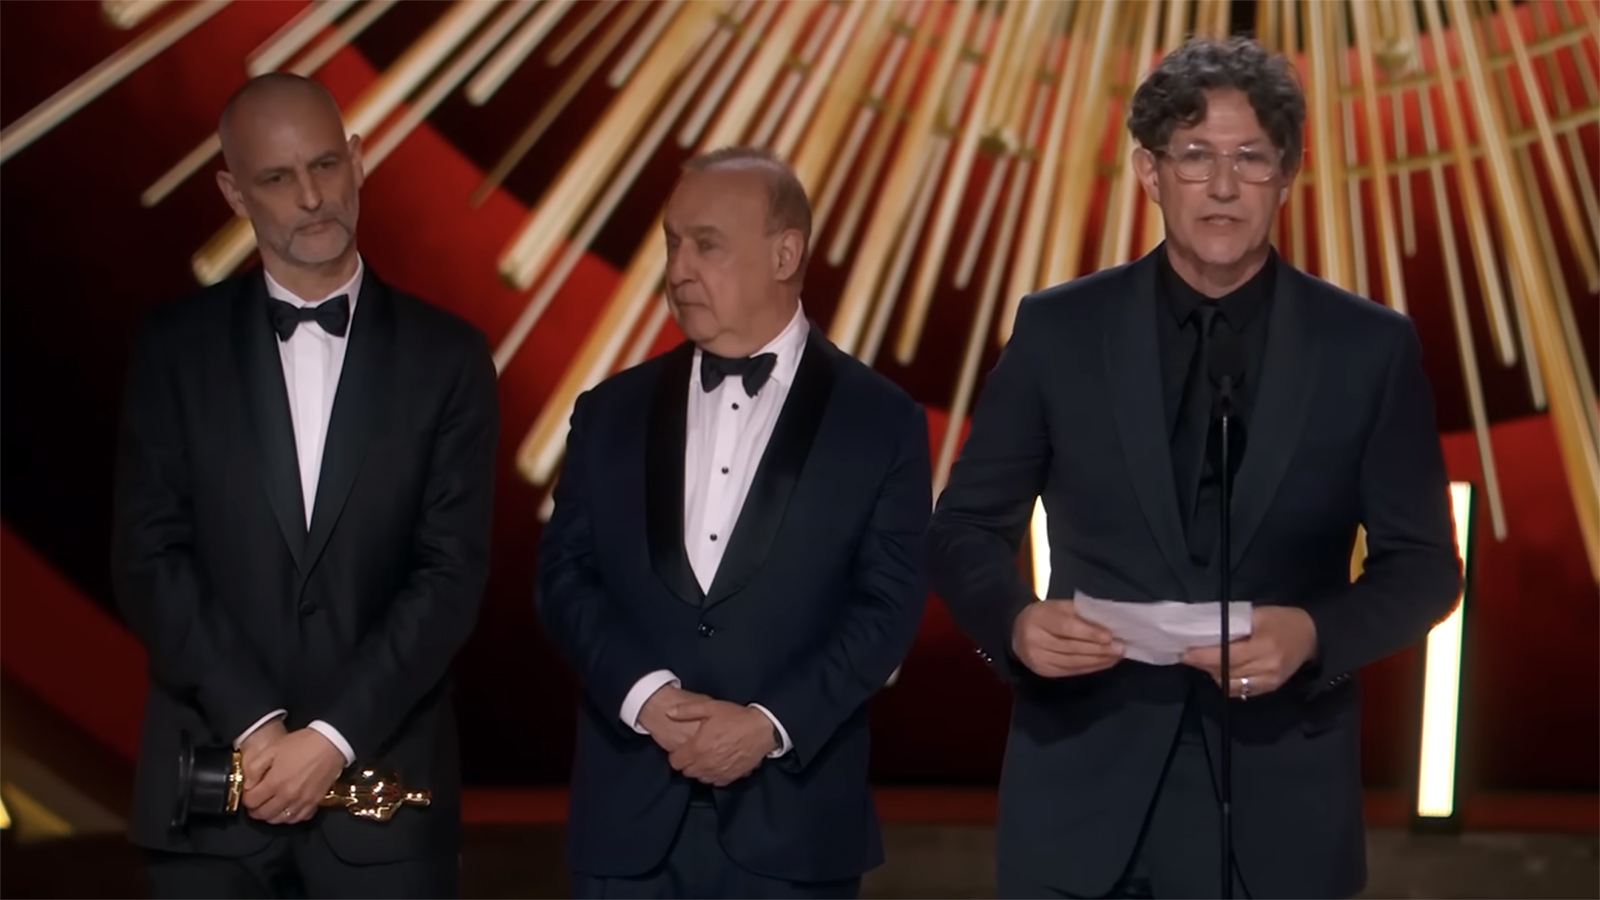 Director Jonathan Glazer, right, gives an acceptance speech after “The Zone of Interest” won the Oscar for best international feature. (Video screen grab via ABC)